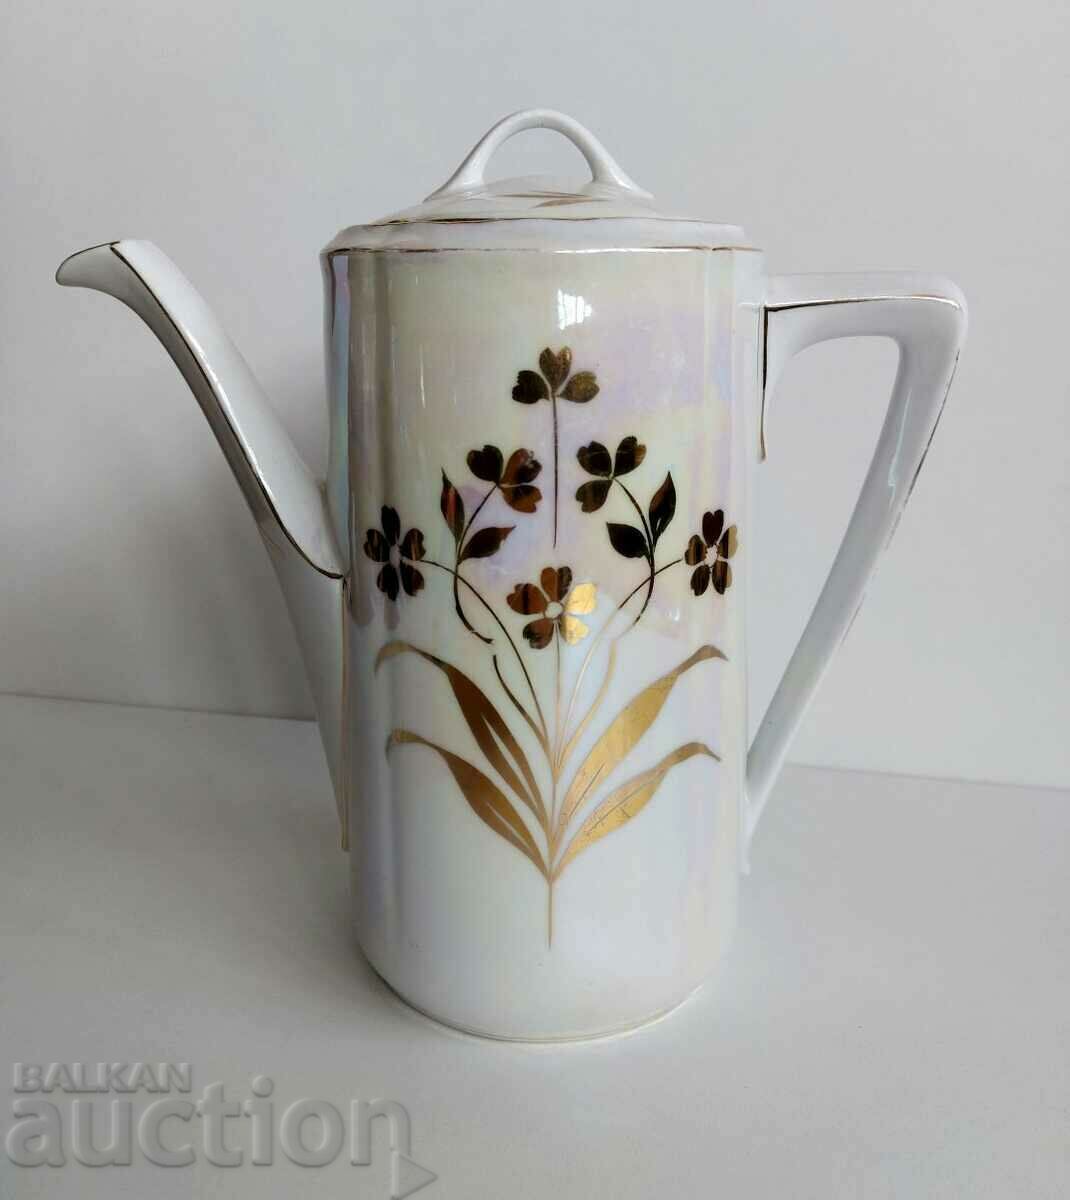 OLD HEALTHY PORCELAIN TEAPOT KETTLE COURT WITH COFFEE LID